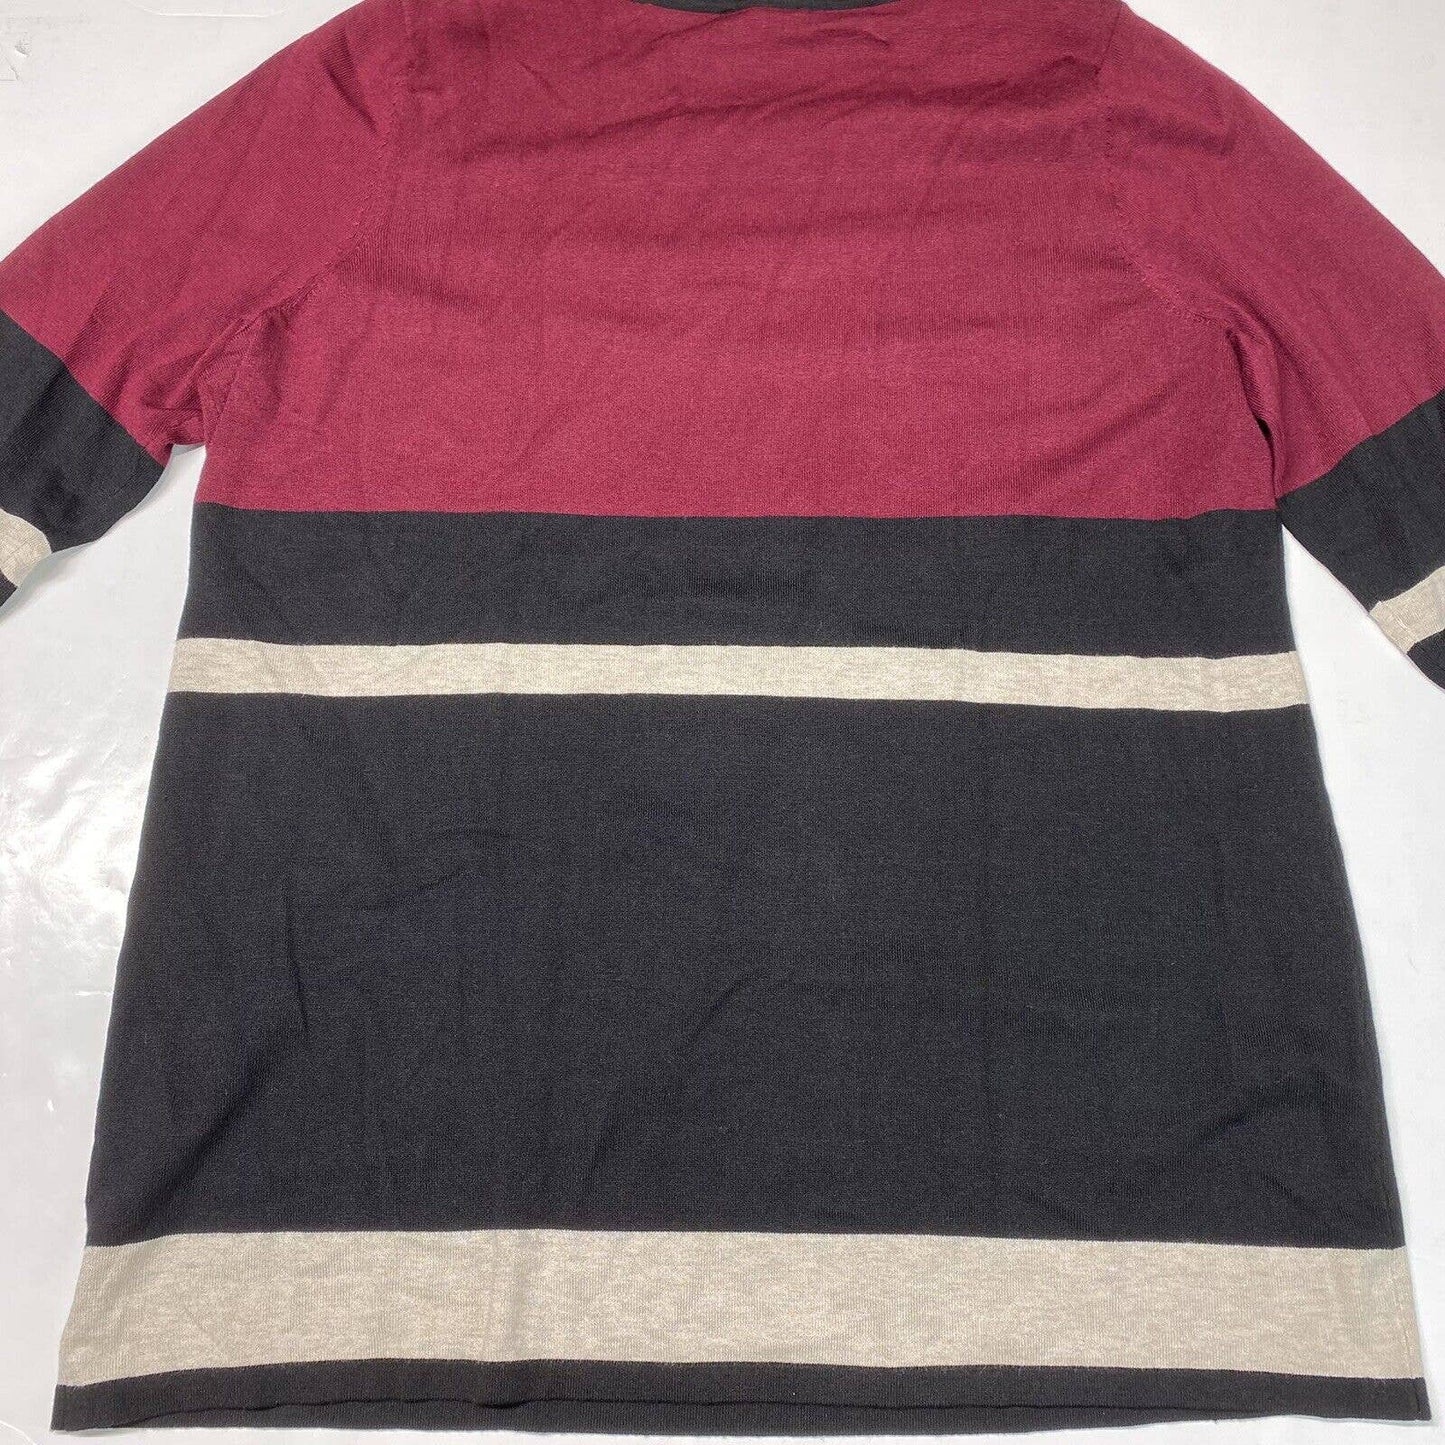 A&I Colorblock Sweater 2X Multicolor Striped Long Sleeve Stretch Knit Top NEW